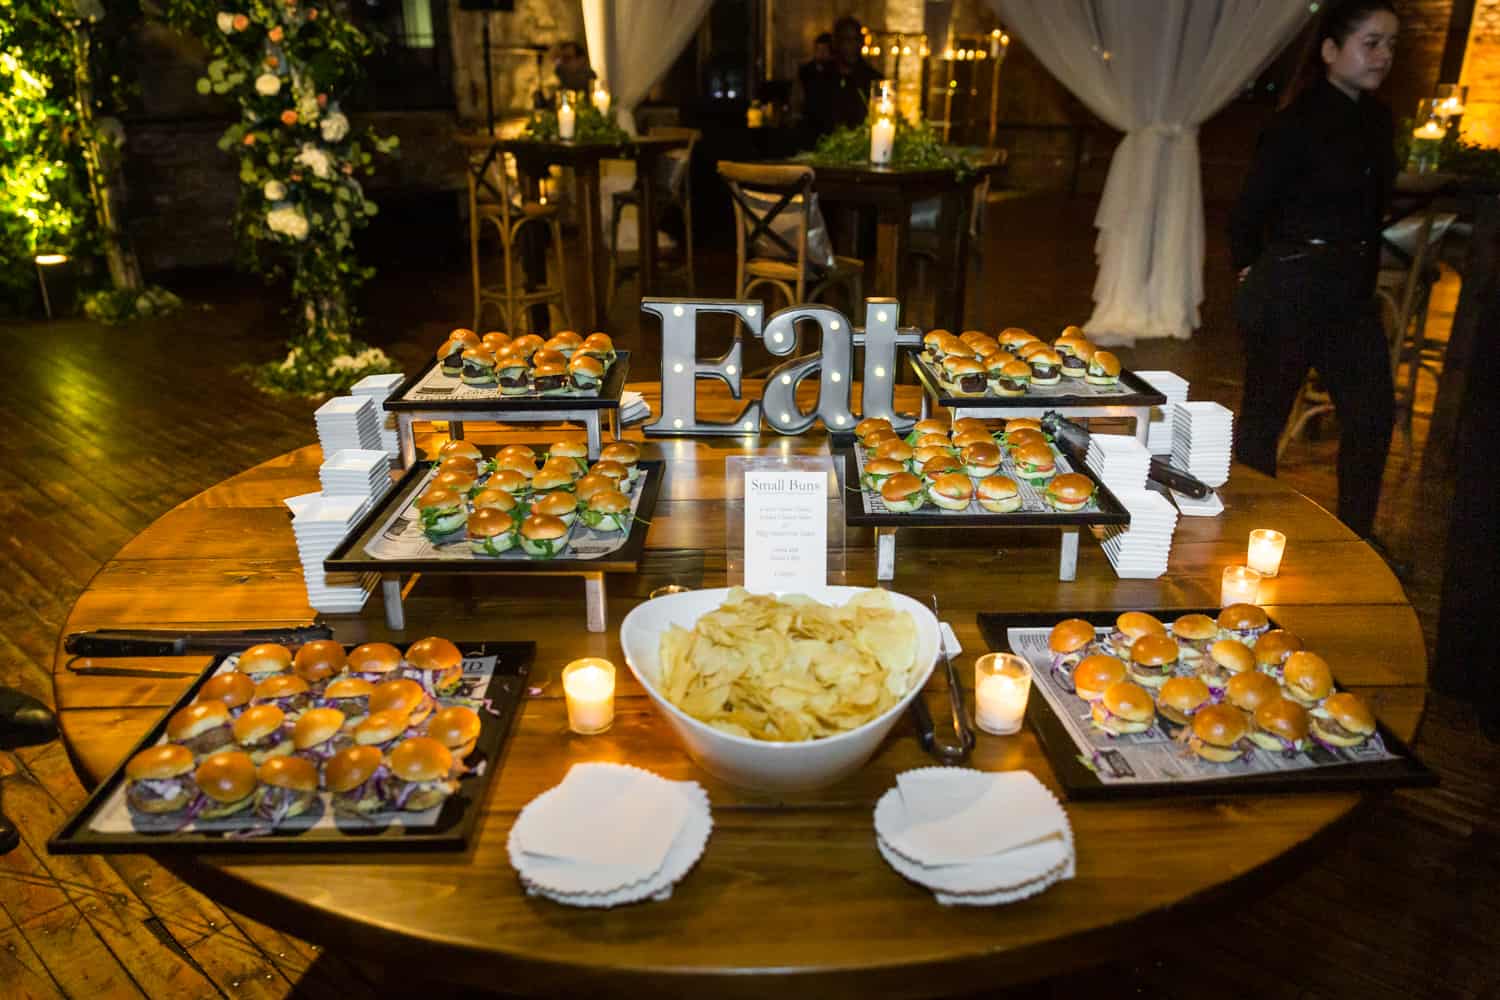 Table filled with plates of mini burgers and 'Eat' sign